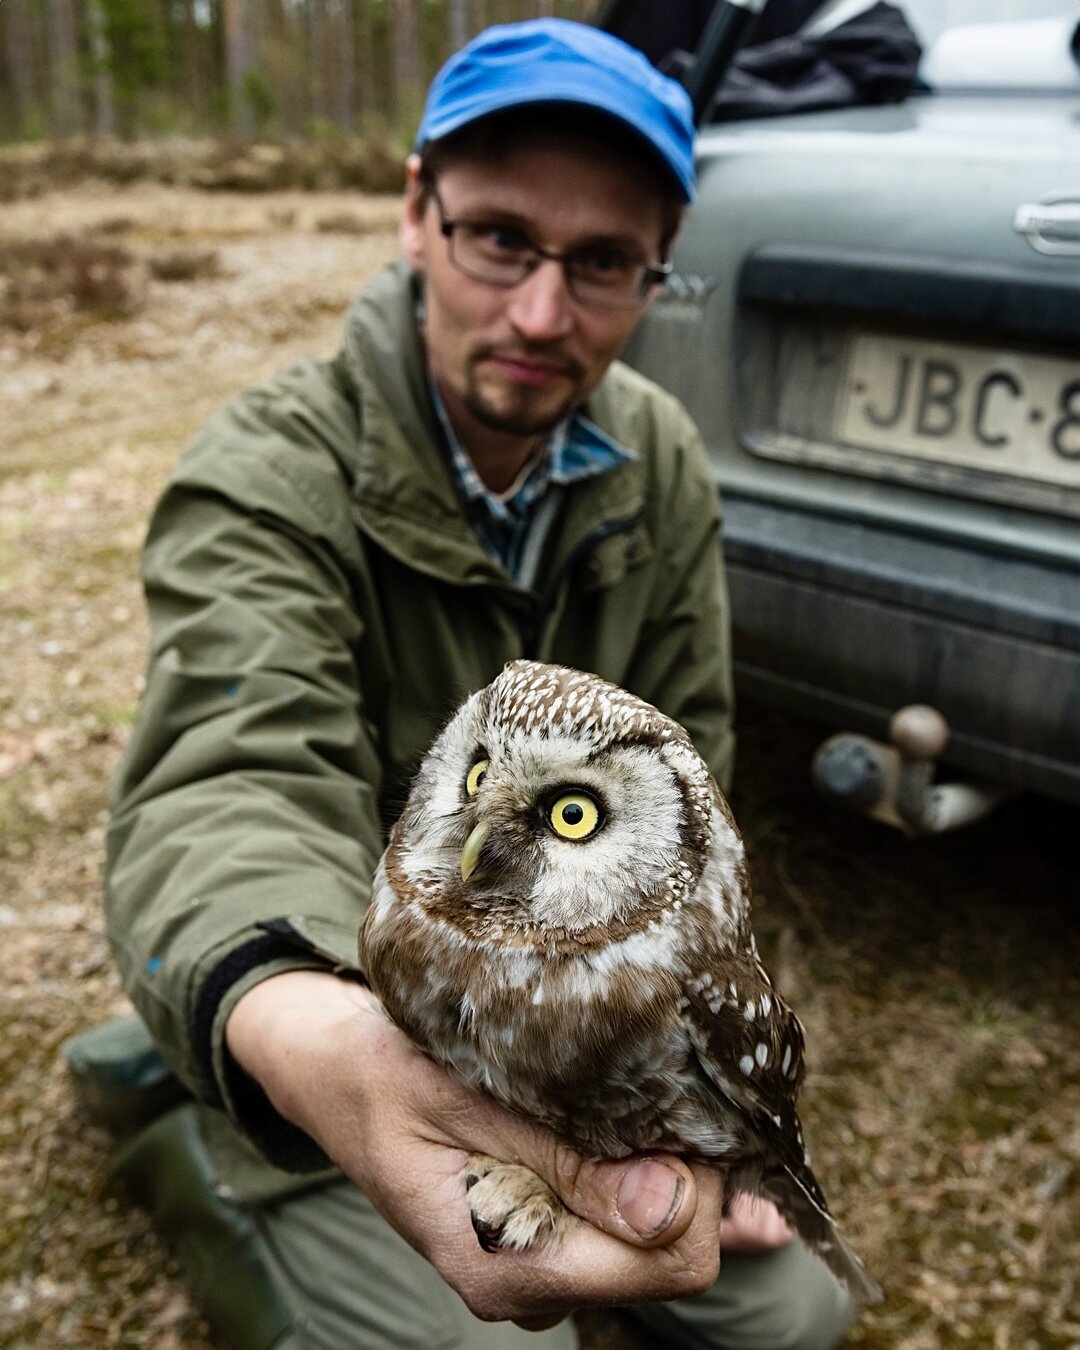 Checking out a Broreal Owl's nest with a local forester in Finland🦉
Look at these fledgelings!😂
The Boreal Owl, also known as the Tengmalm's Owl, is a small owl species that inhabits the boreal forests of northern Europe, including Finland. They ha